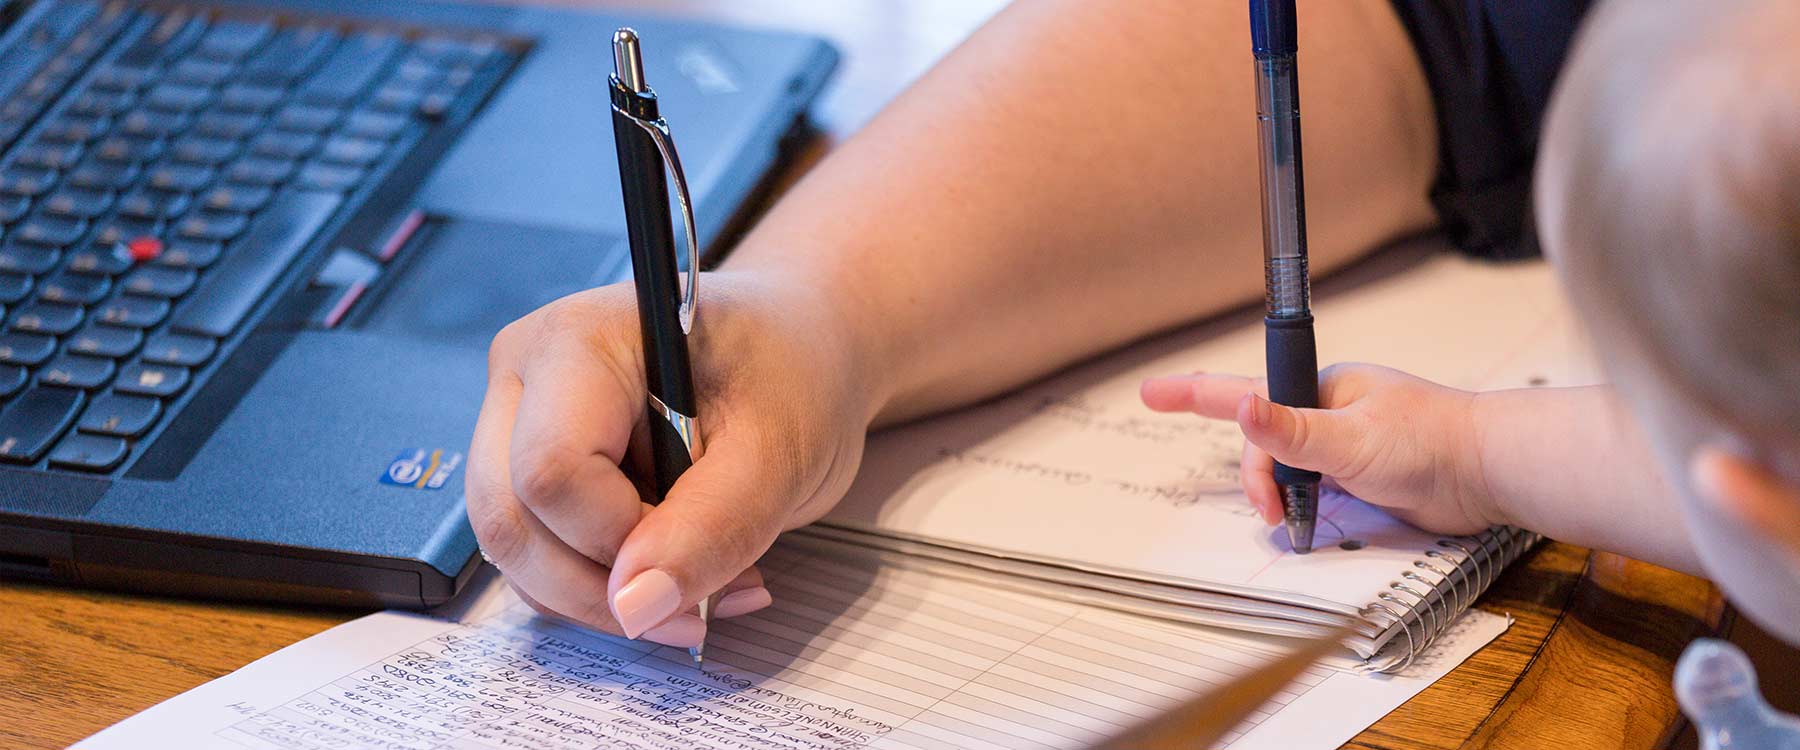 A continuing studies student writes information into a table. A child's hand holds a pen and scribbles in the student’s notebook.